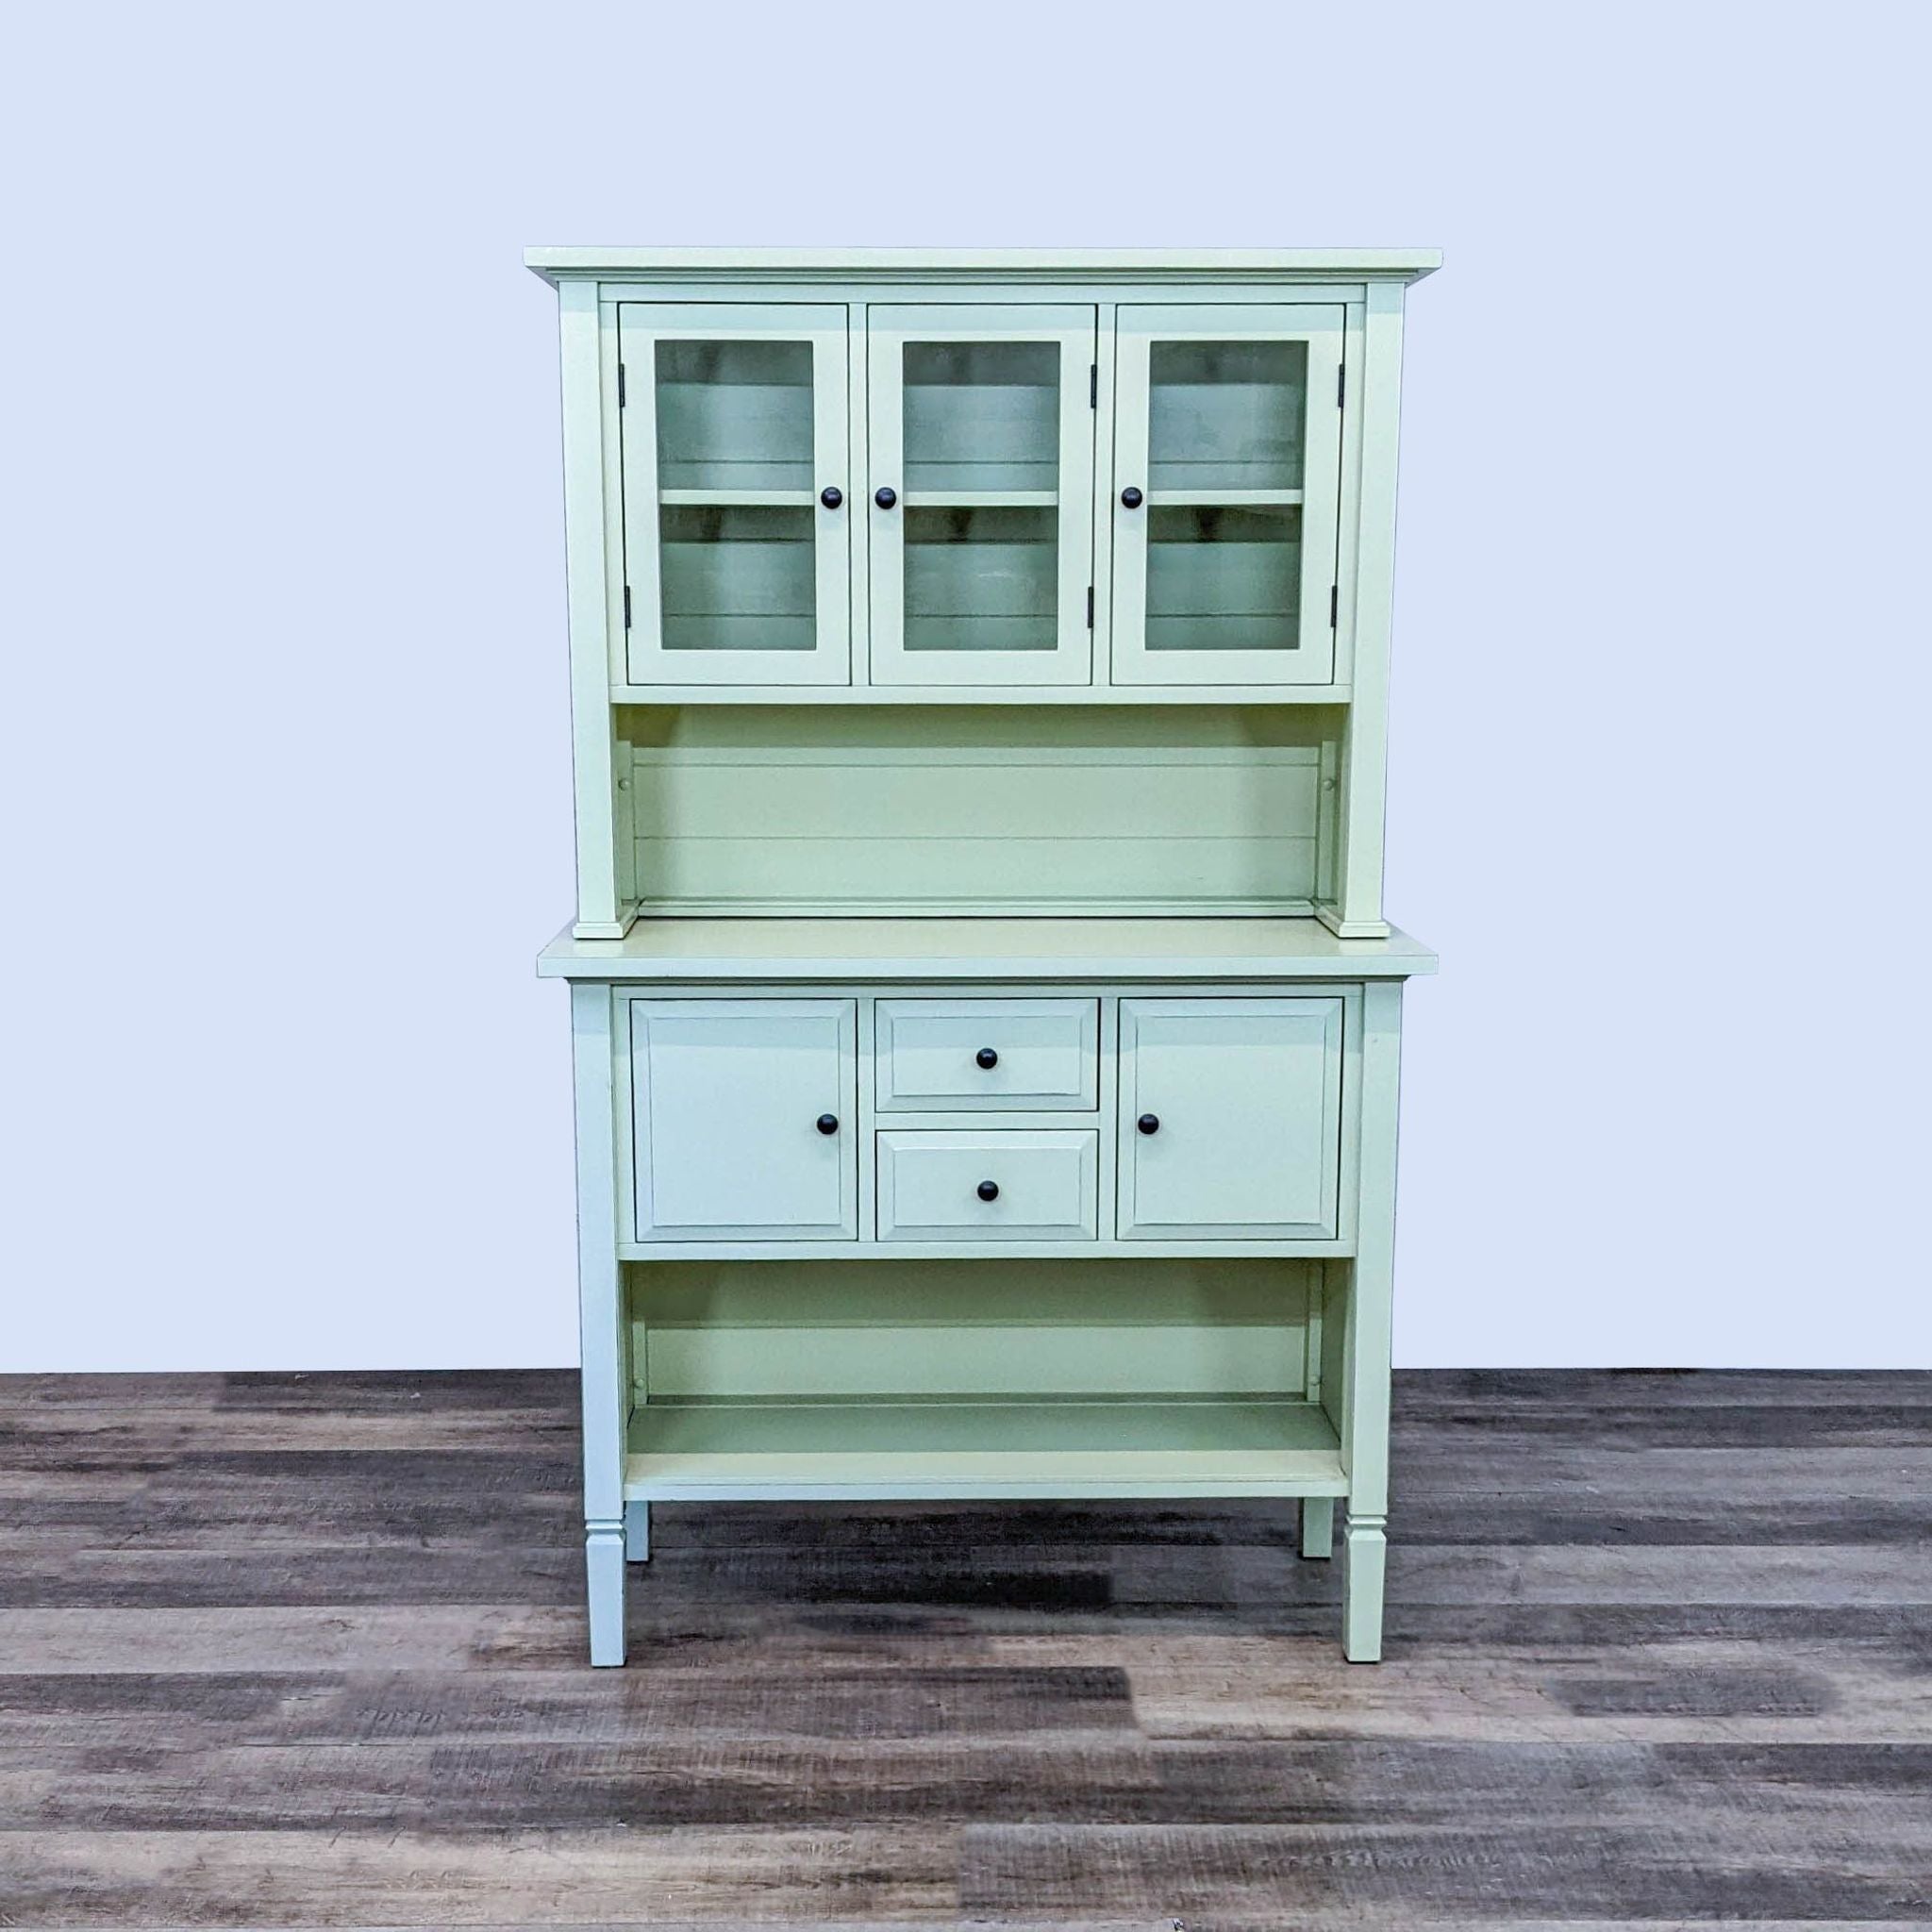 Crate & Barrel farmhouse-style hutch by Kathleen Wills with glass-paneled doors and drawers in a pale green hue, displayed against a white backdrop.